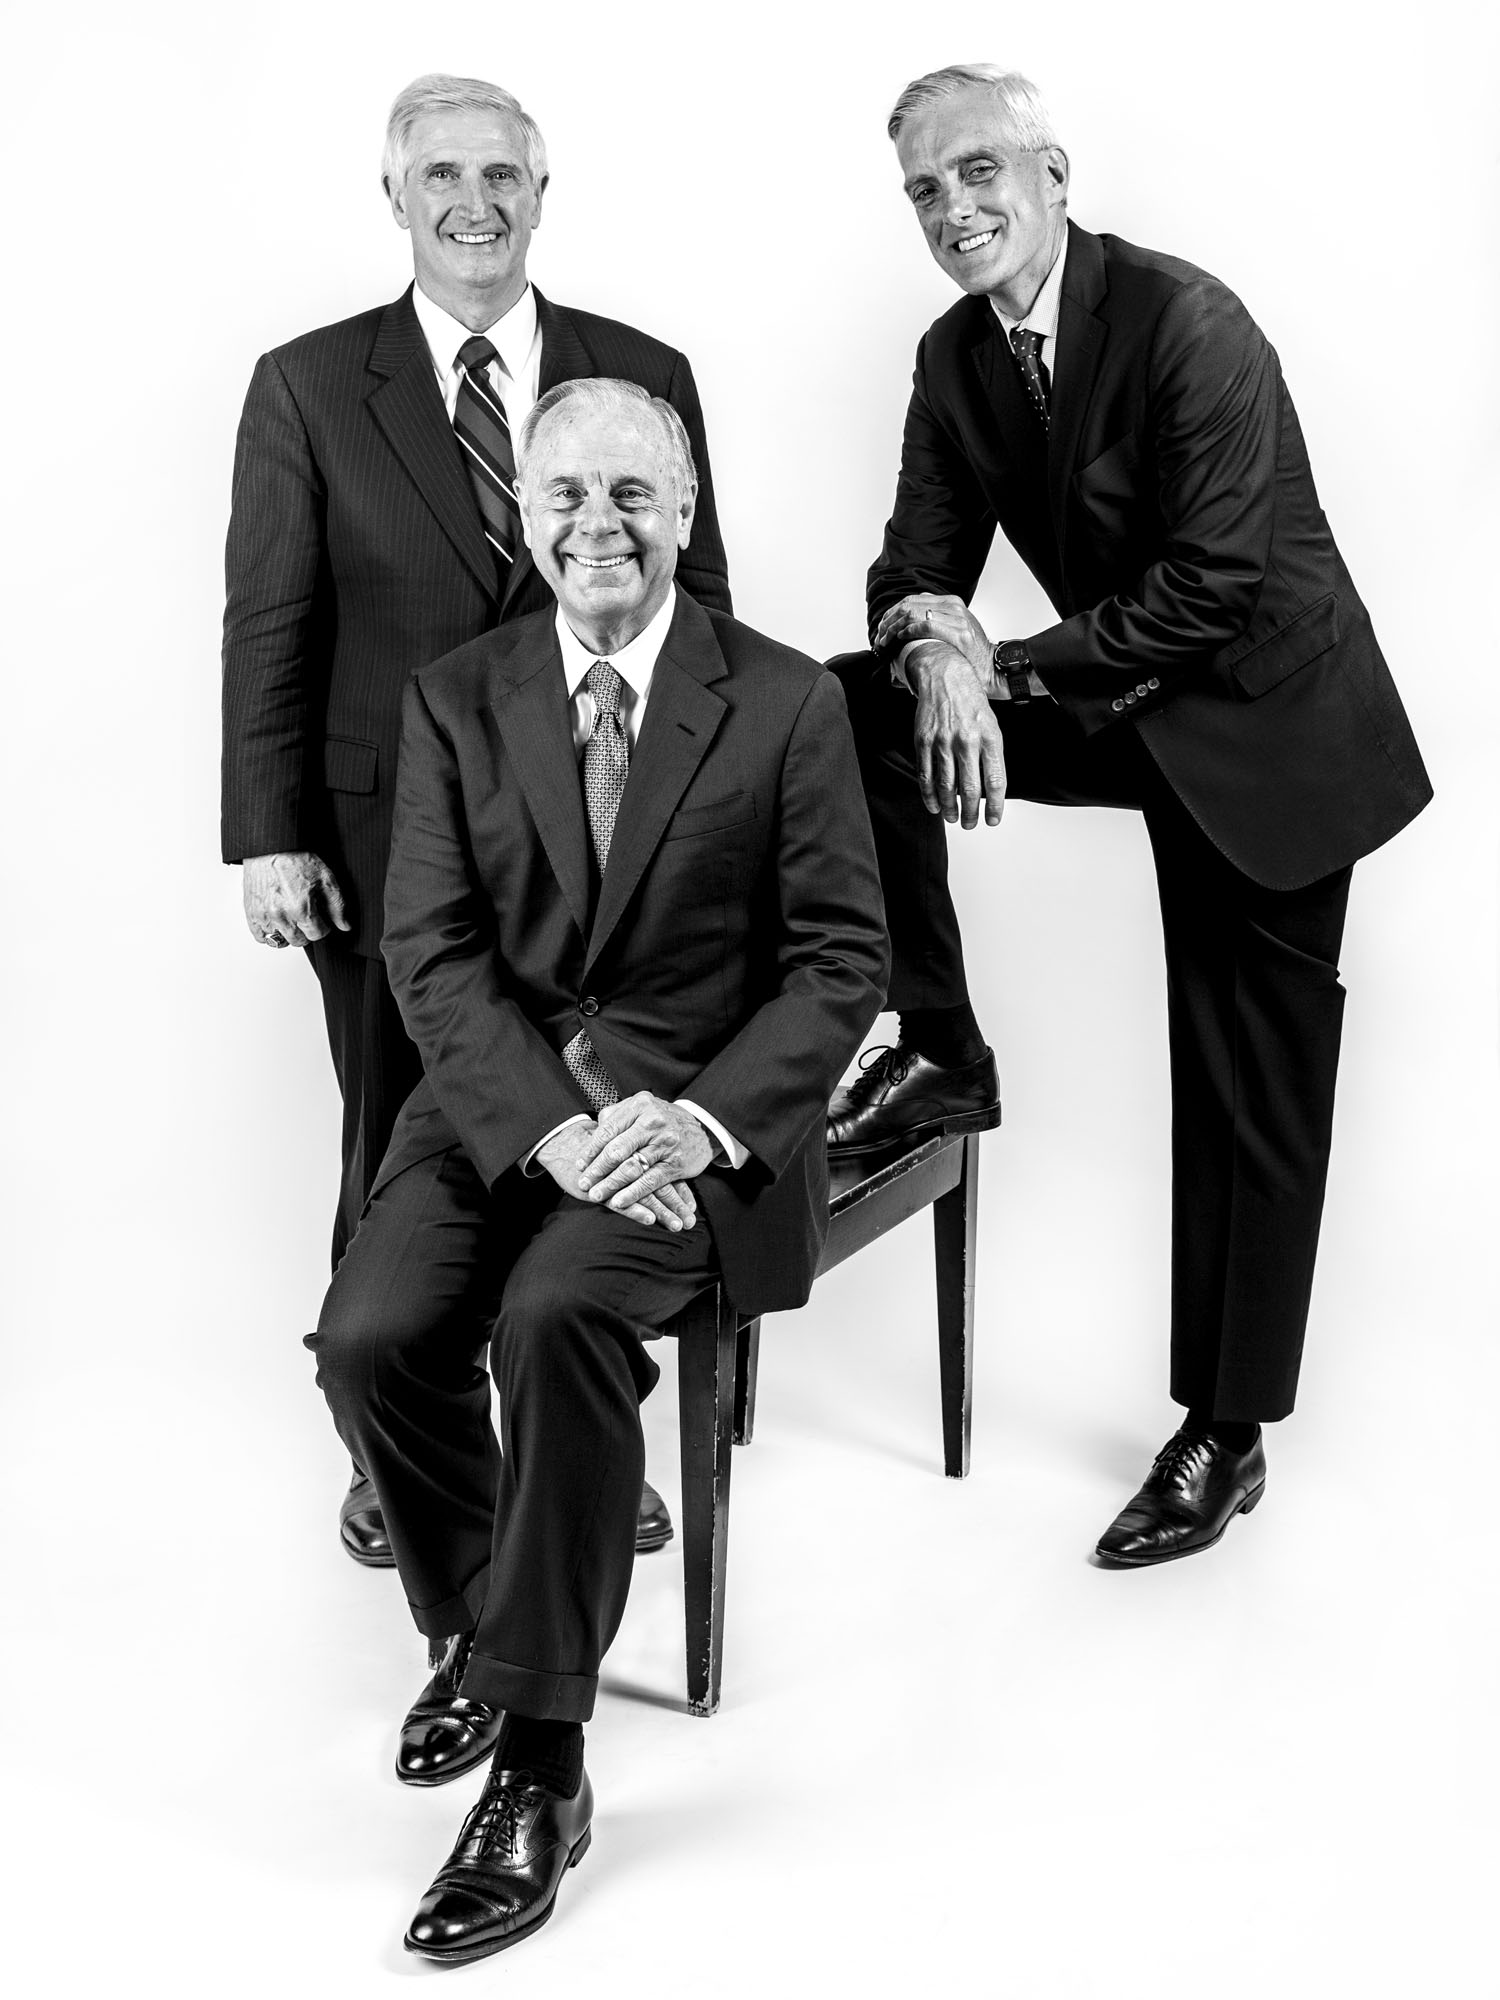 Portrait of Andrew Card, Thomas“Mack” McLarty and Denis McDonough.